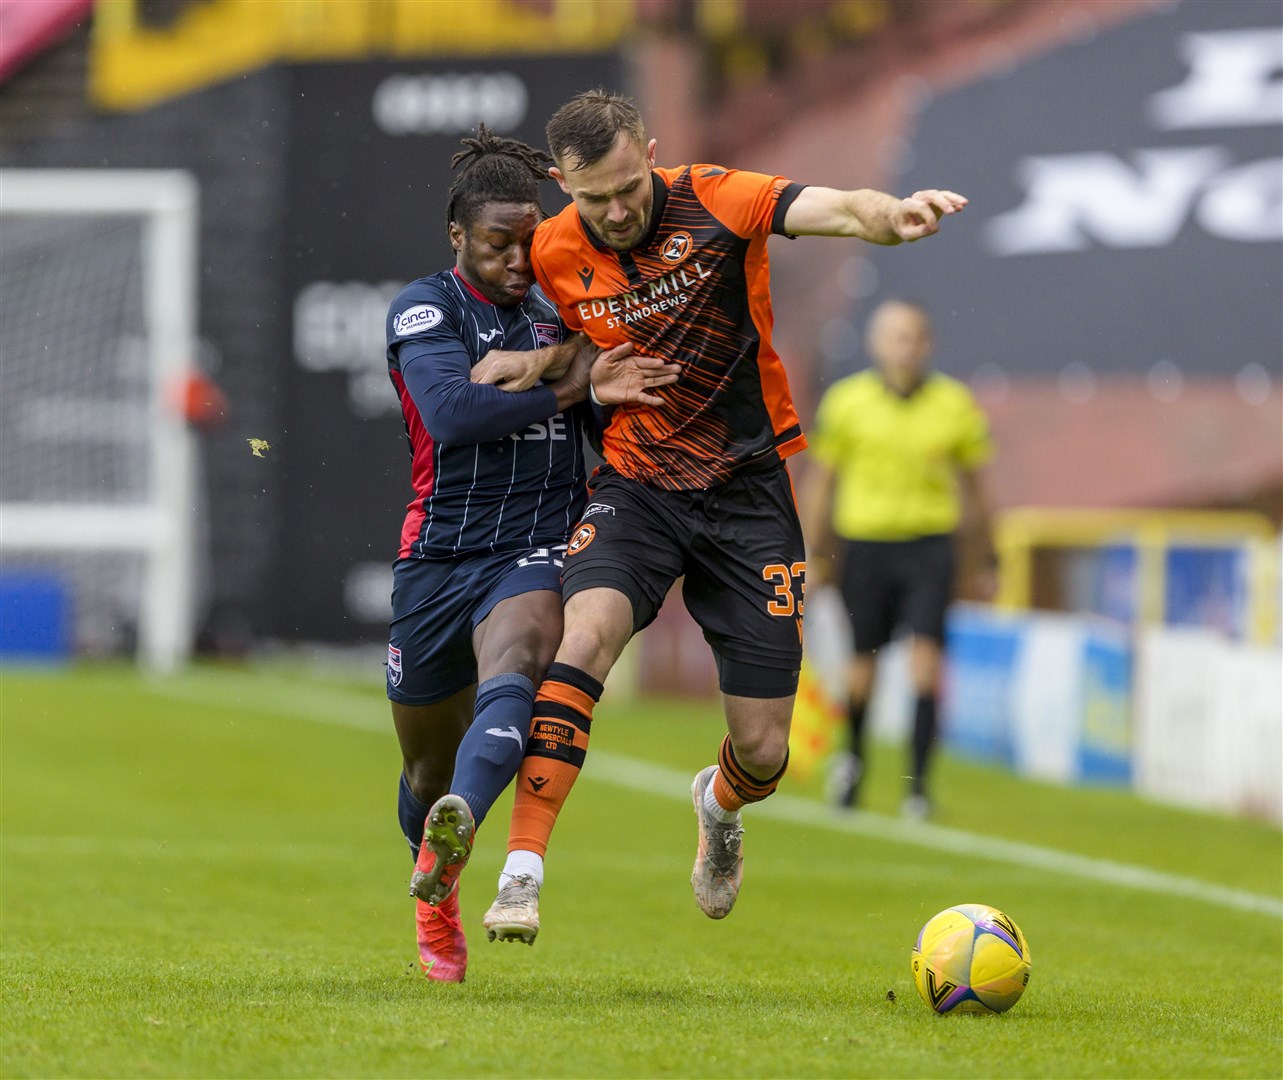 Jo Hungbo in previous action against Dundee United this season